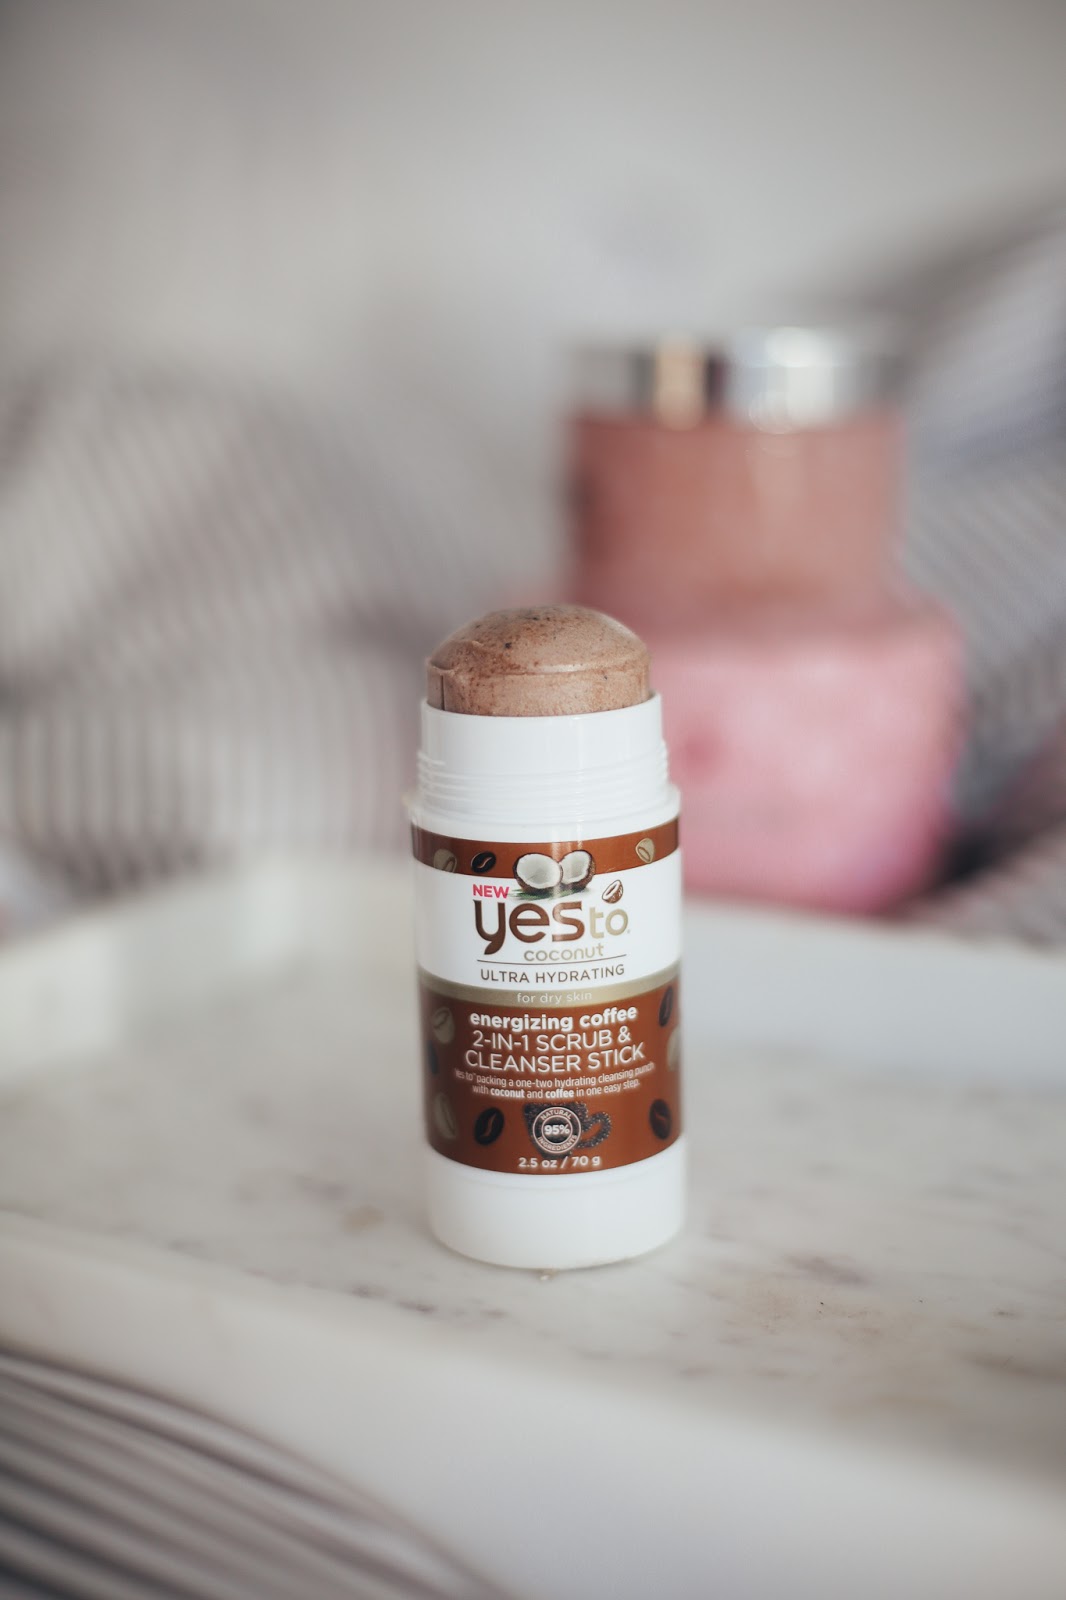 yes to energising coffee 2-in-1 scrub